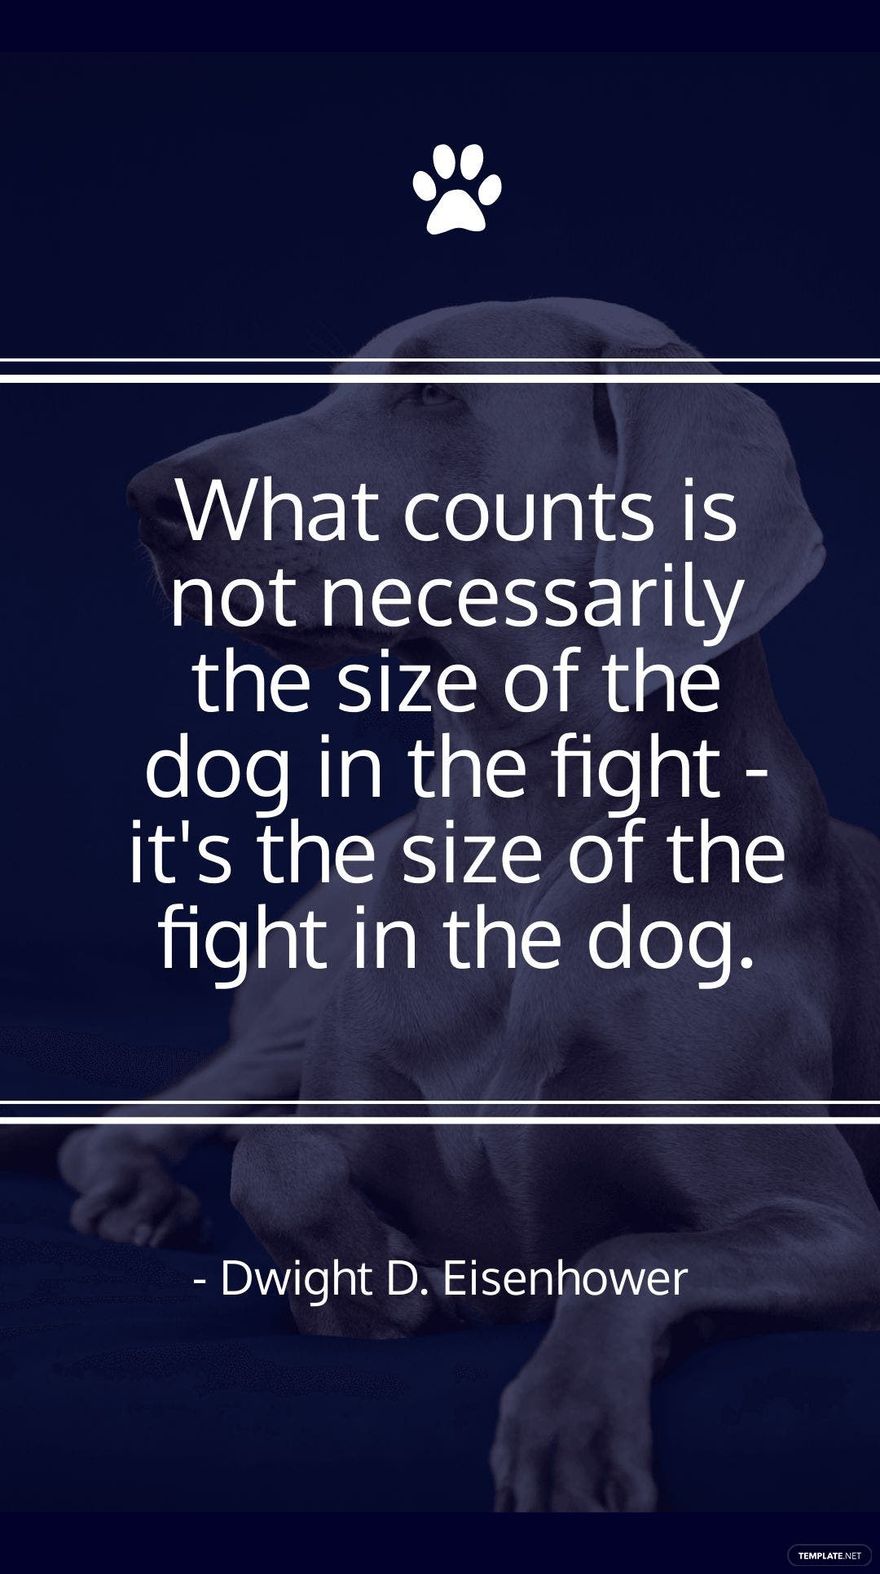 Free Dwight D. Eisenhower - What counts is not necessarily the size of the dog in the fight - it's the size of the fight in the dog. in JPG